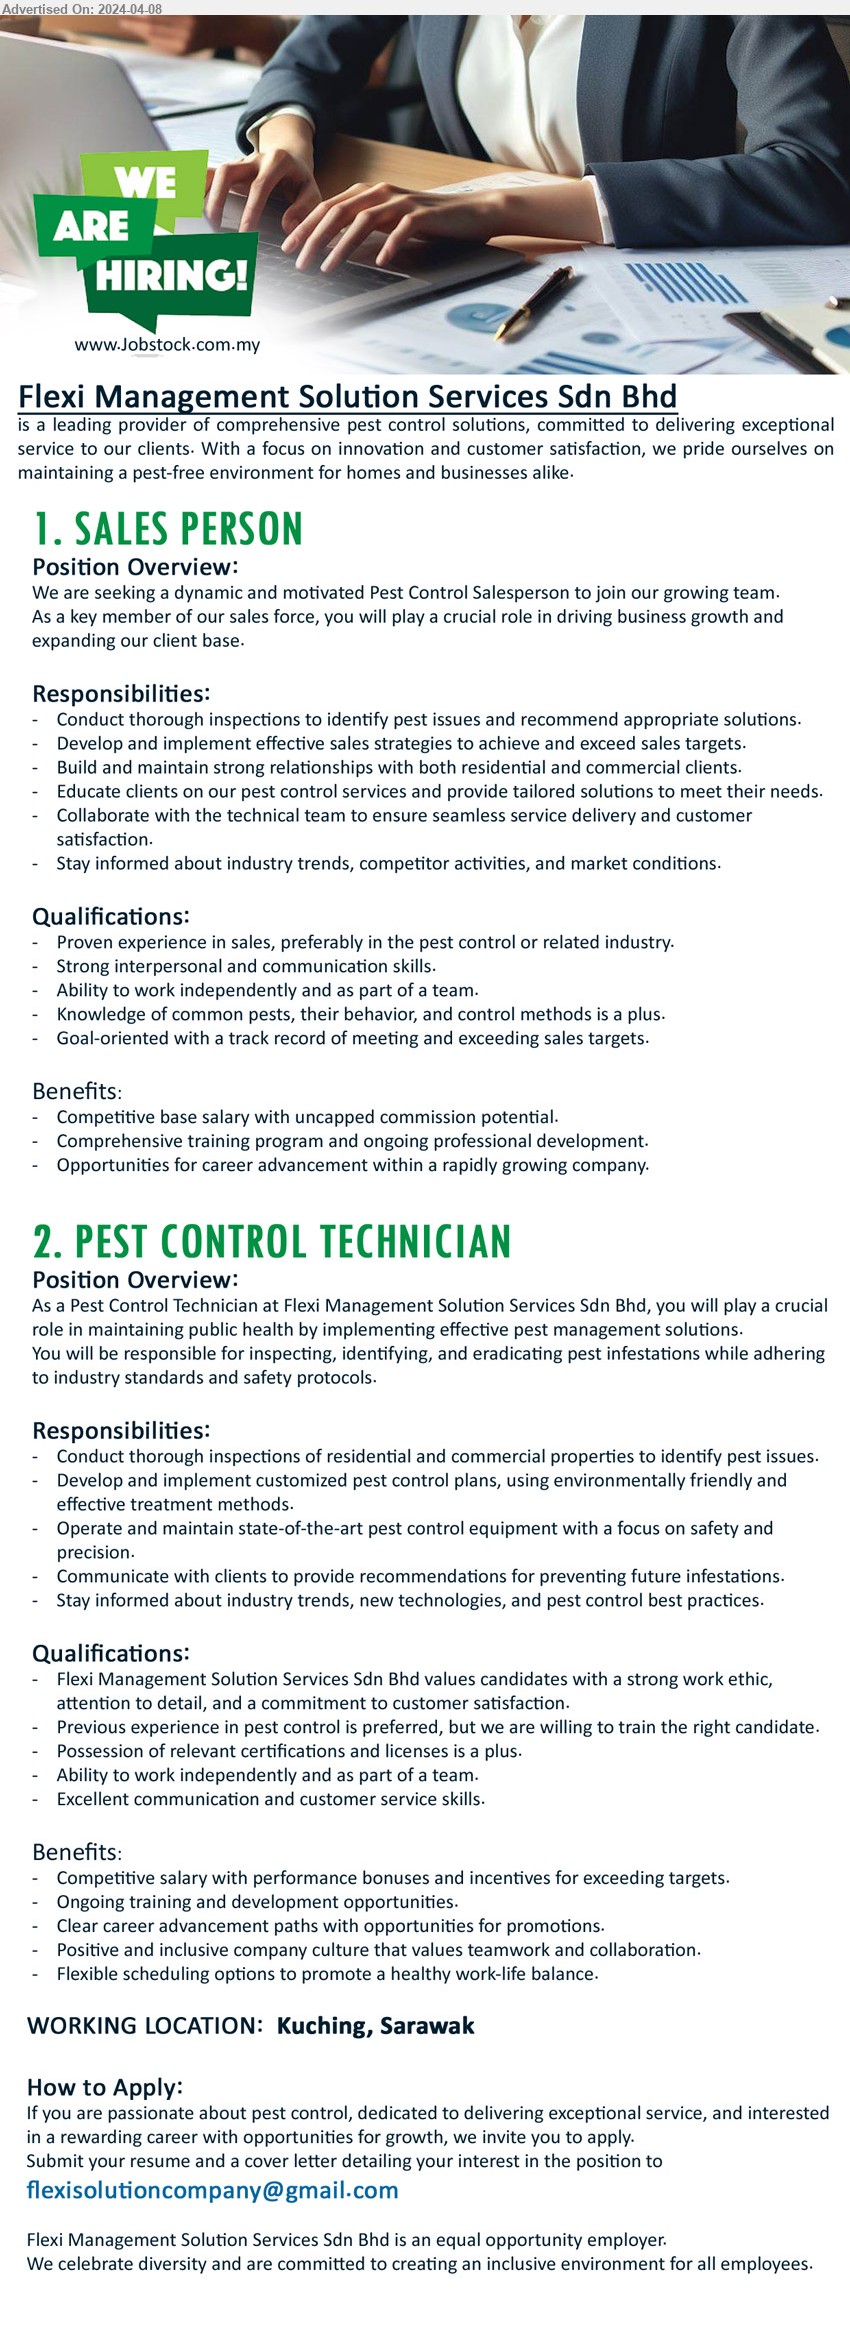 FLEXI MANAGEMENT SOLUTION SERVICES SDN BHD - 1. SALES PERSON (Kuching), Proven experience in sales, preferably in the pest control or related industry, Knowledge of common pests, their behavior, and control methods is a plus,...
2. PEST CONTROL TECHNICIAN (Kuching), Previous experience in pest control is preferred, but we are willing to train the right candidate,...
Email resume to ...
